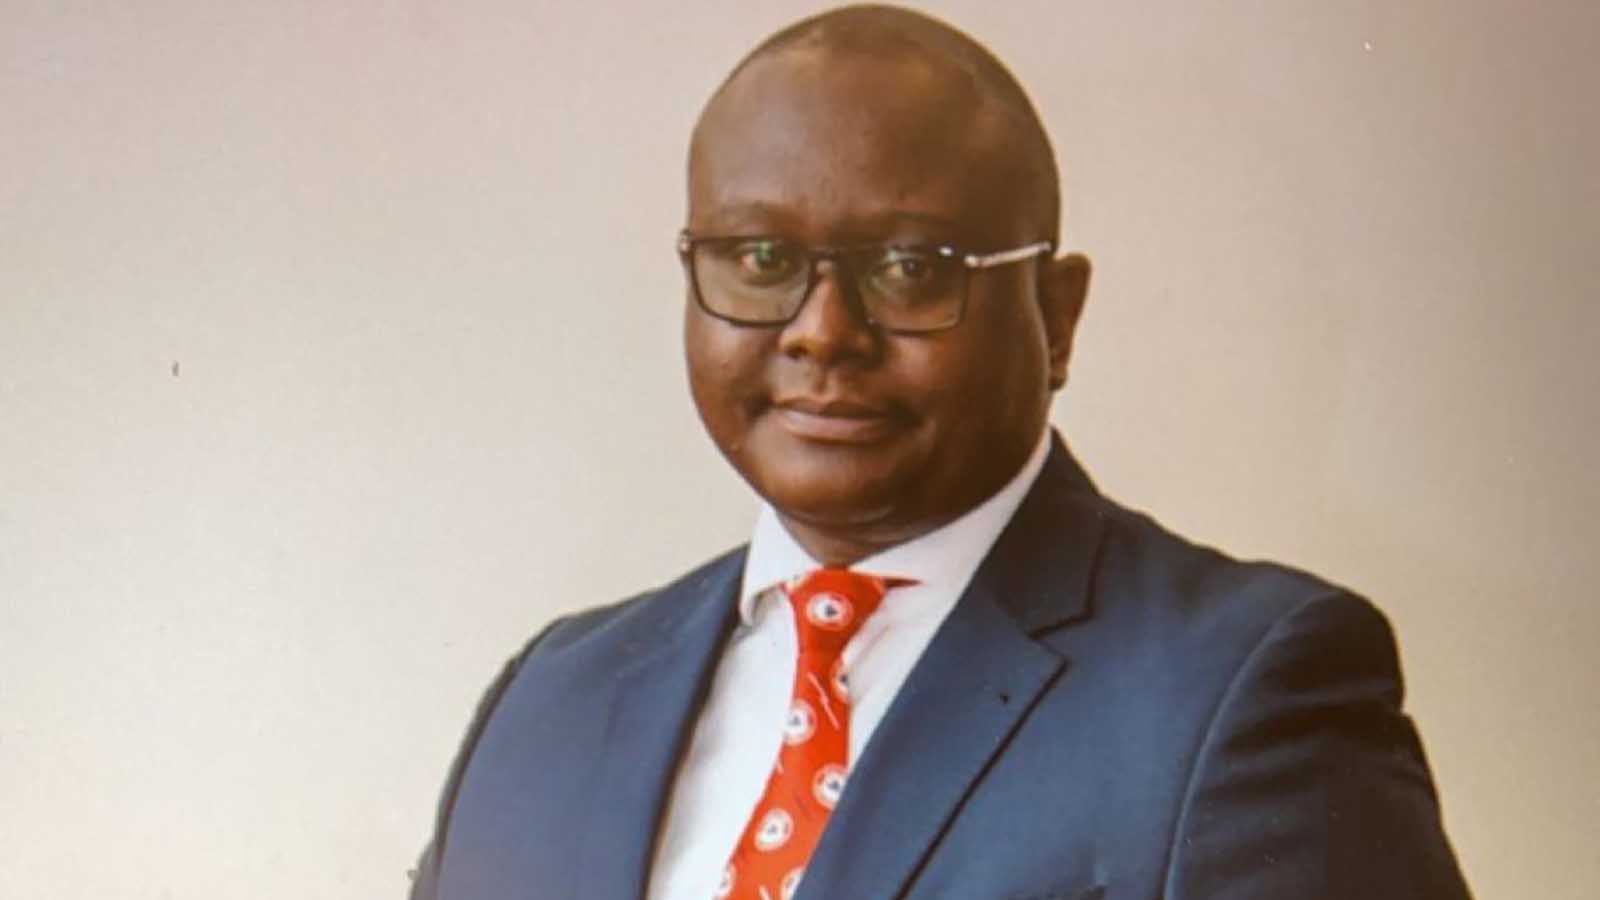 <strong>Zambeef names M’boo Mumba as Chief Financial Officer, Director to board</strong>